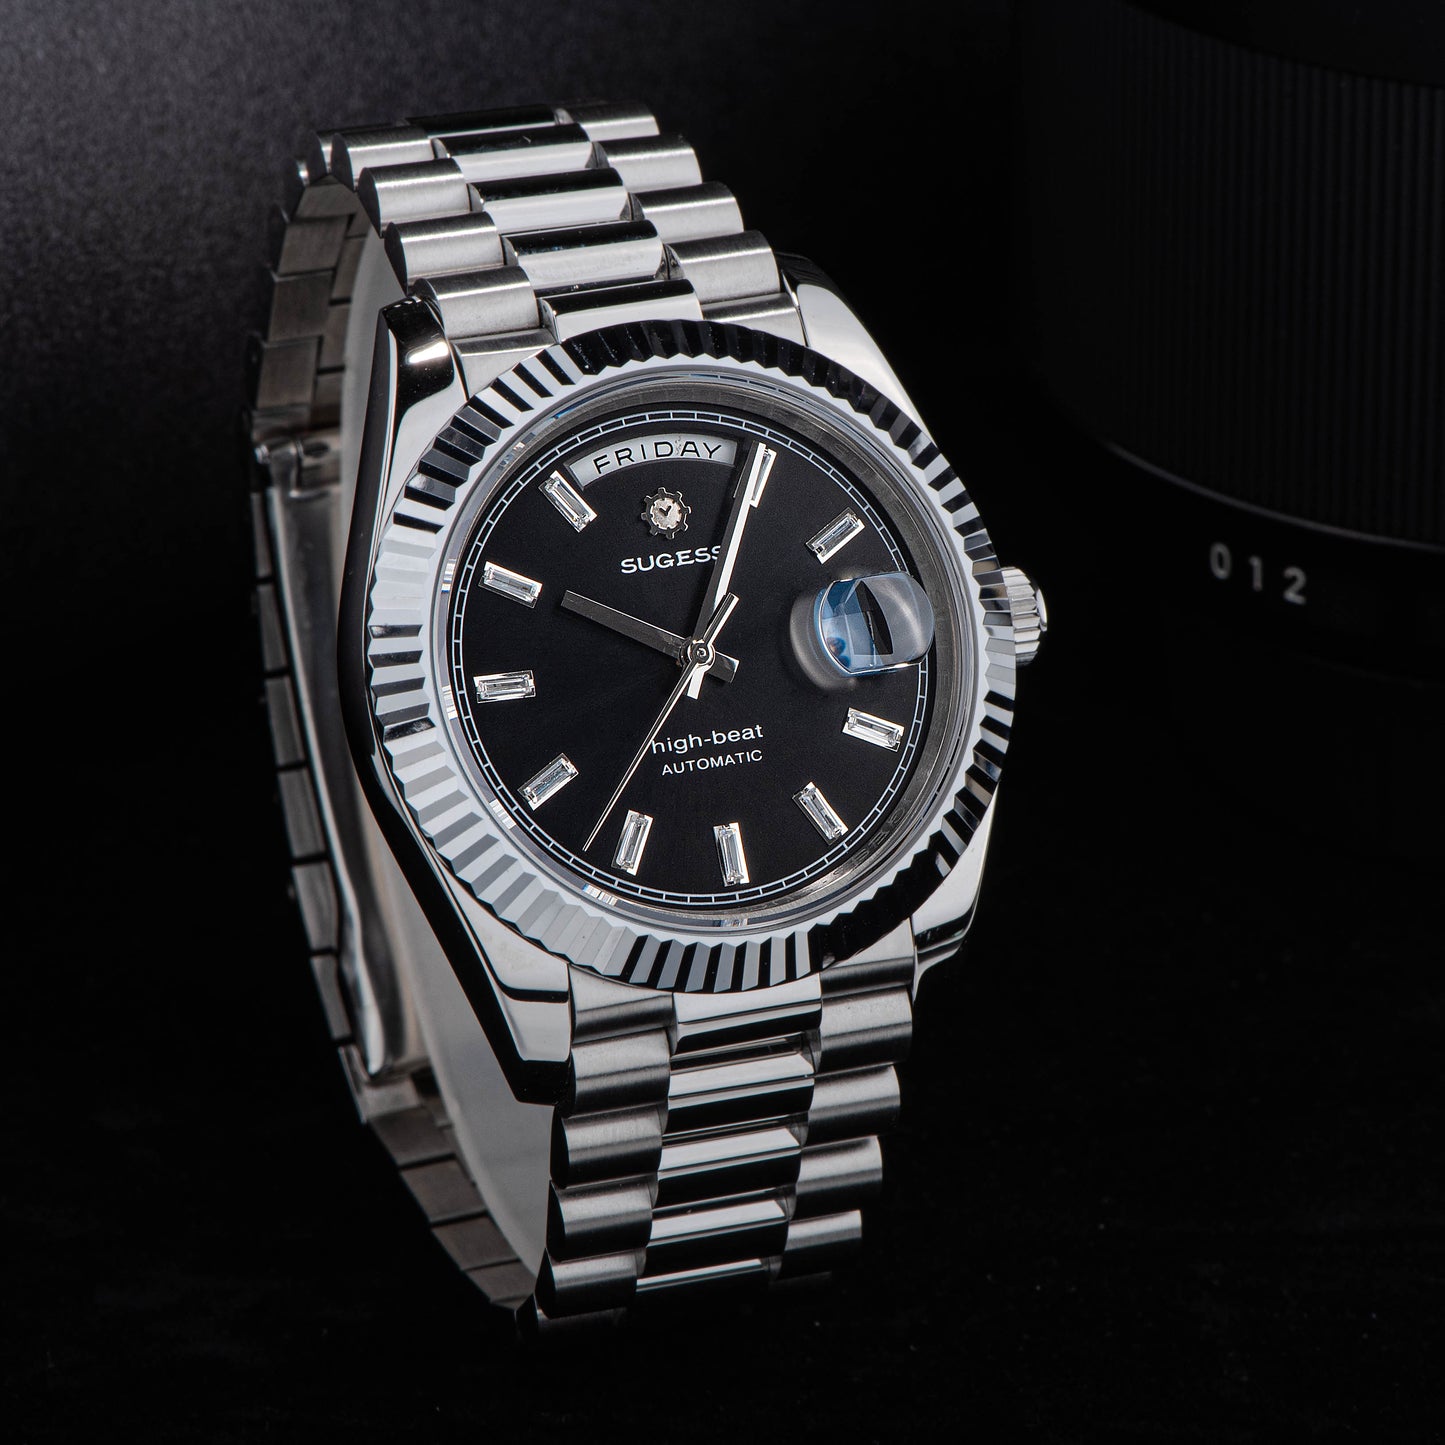 Heritage S433 DD Date and Day Display Stainless-Steel Automatic